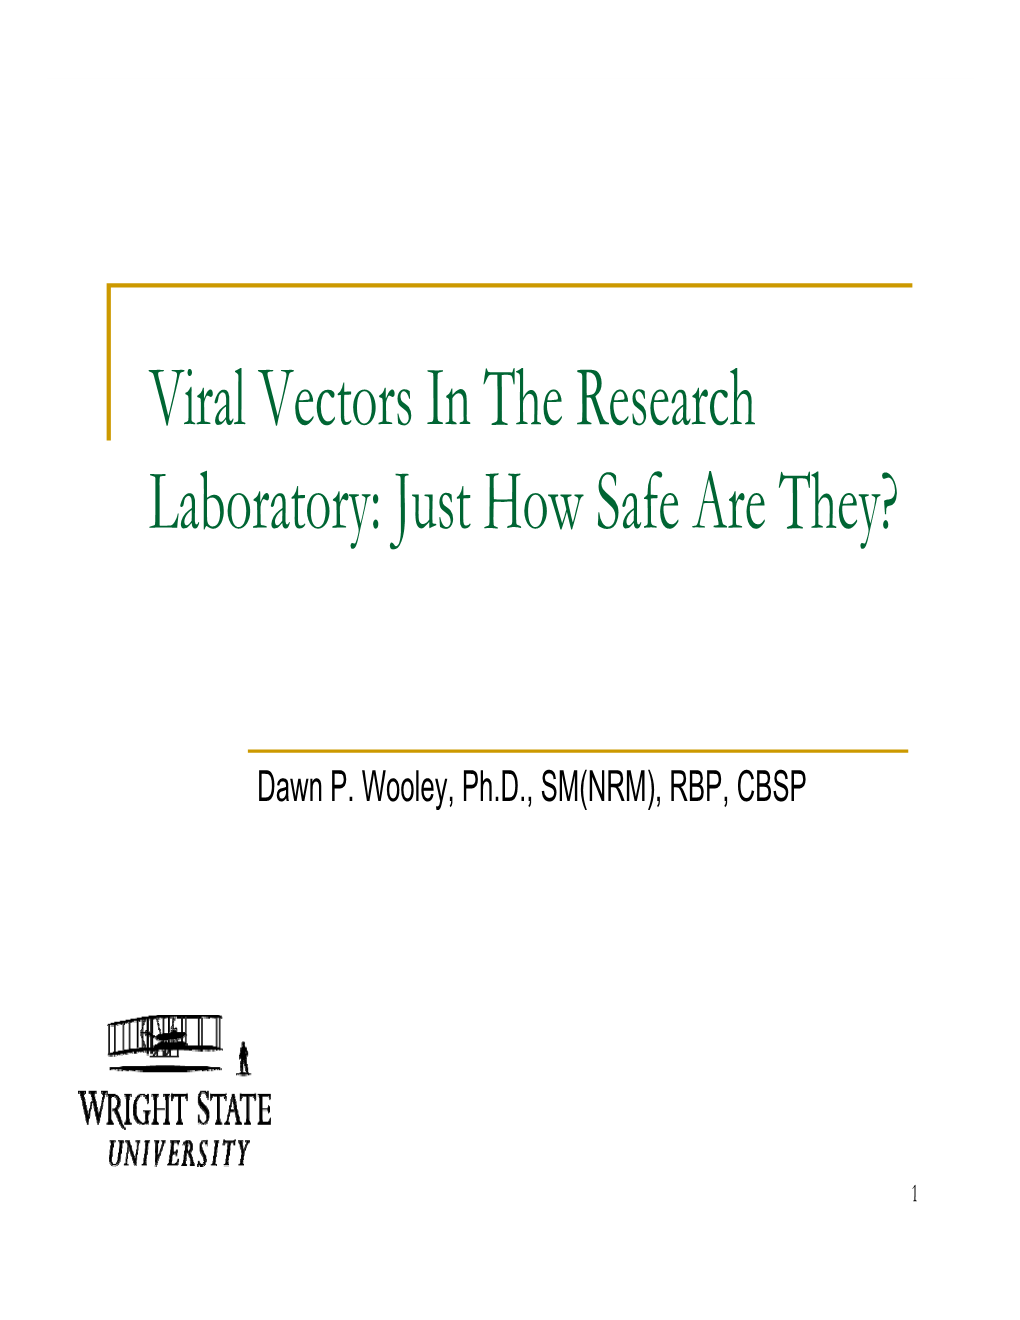 Viral Vectors in the Research Laboratory: Just How Safe Are They?